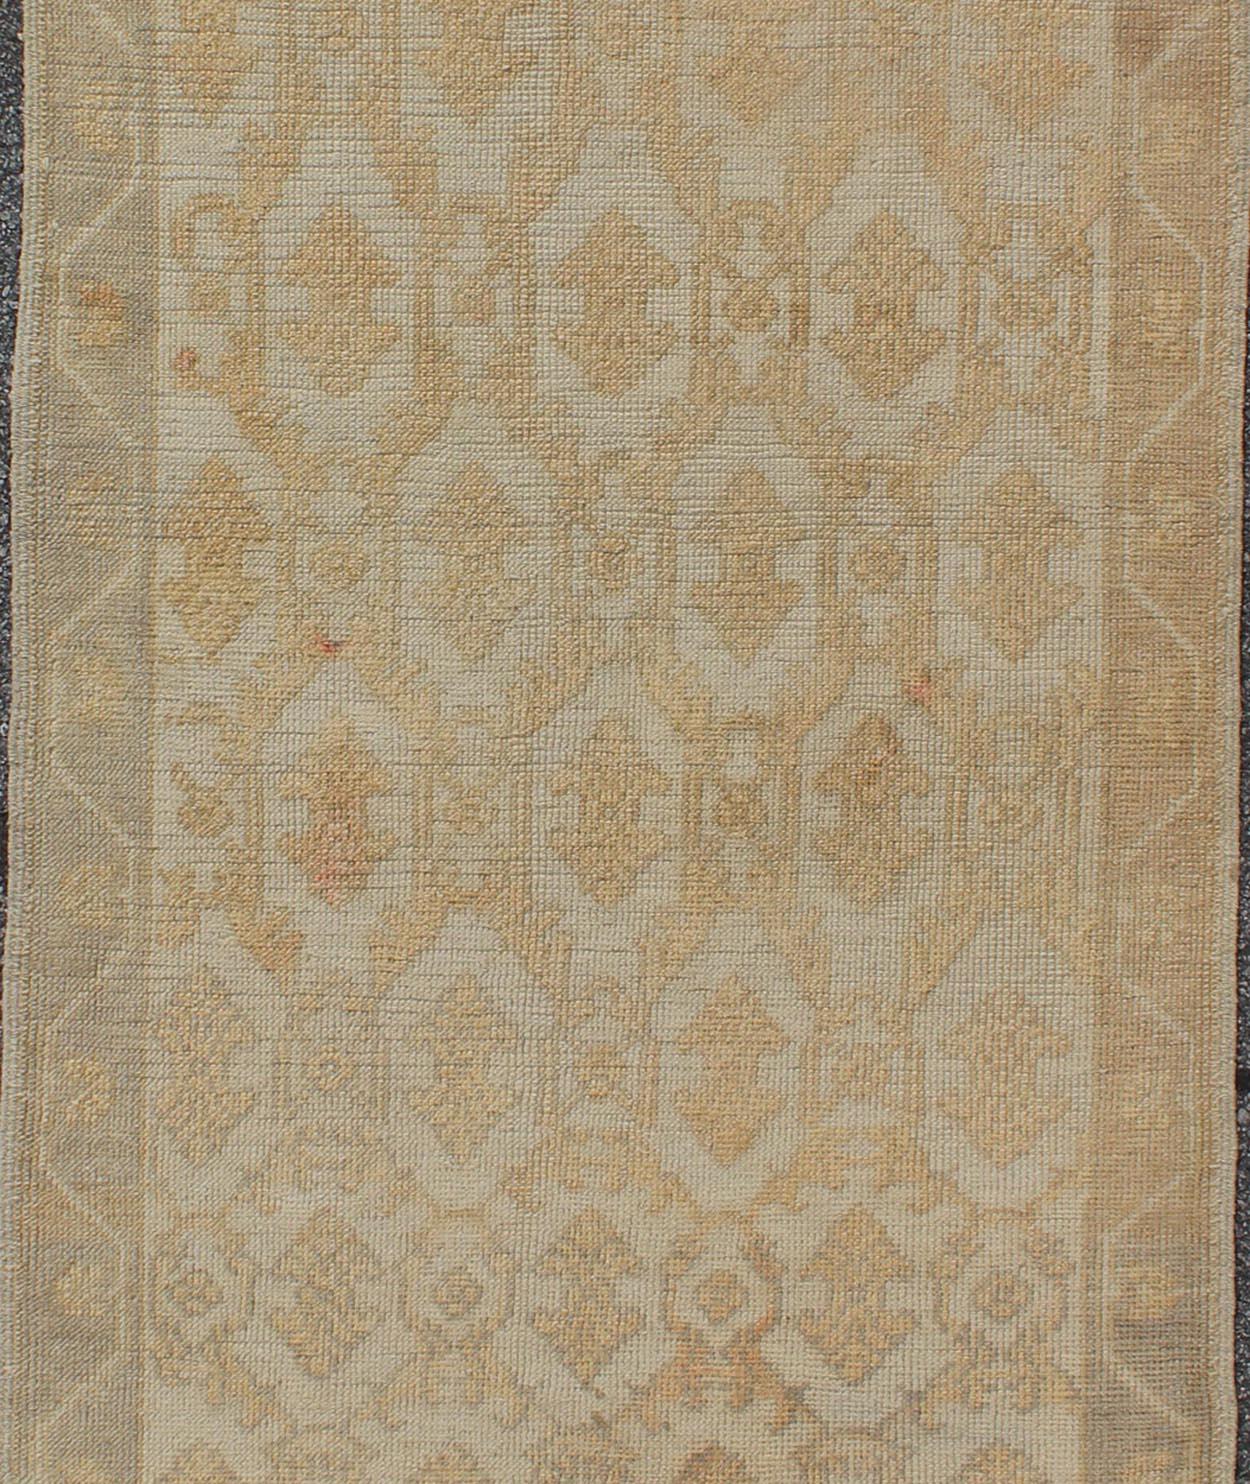 Measures: 3'3 x 8'7

Set on a cream-colored field with an all-over similarly-toned pattern, this beautiful midcentury Turkish Oushak rug (circa 1950) features cross-latch and lattice work framing double arrow-heads. A simple vining border frames the